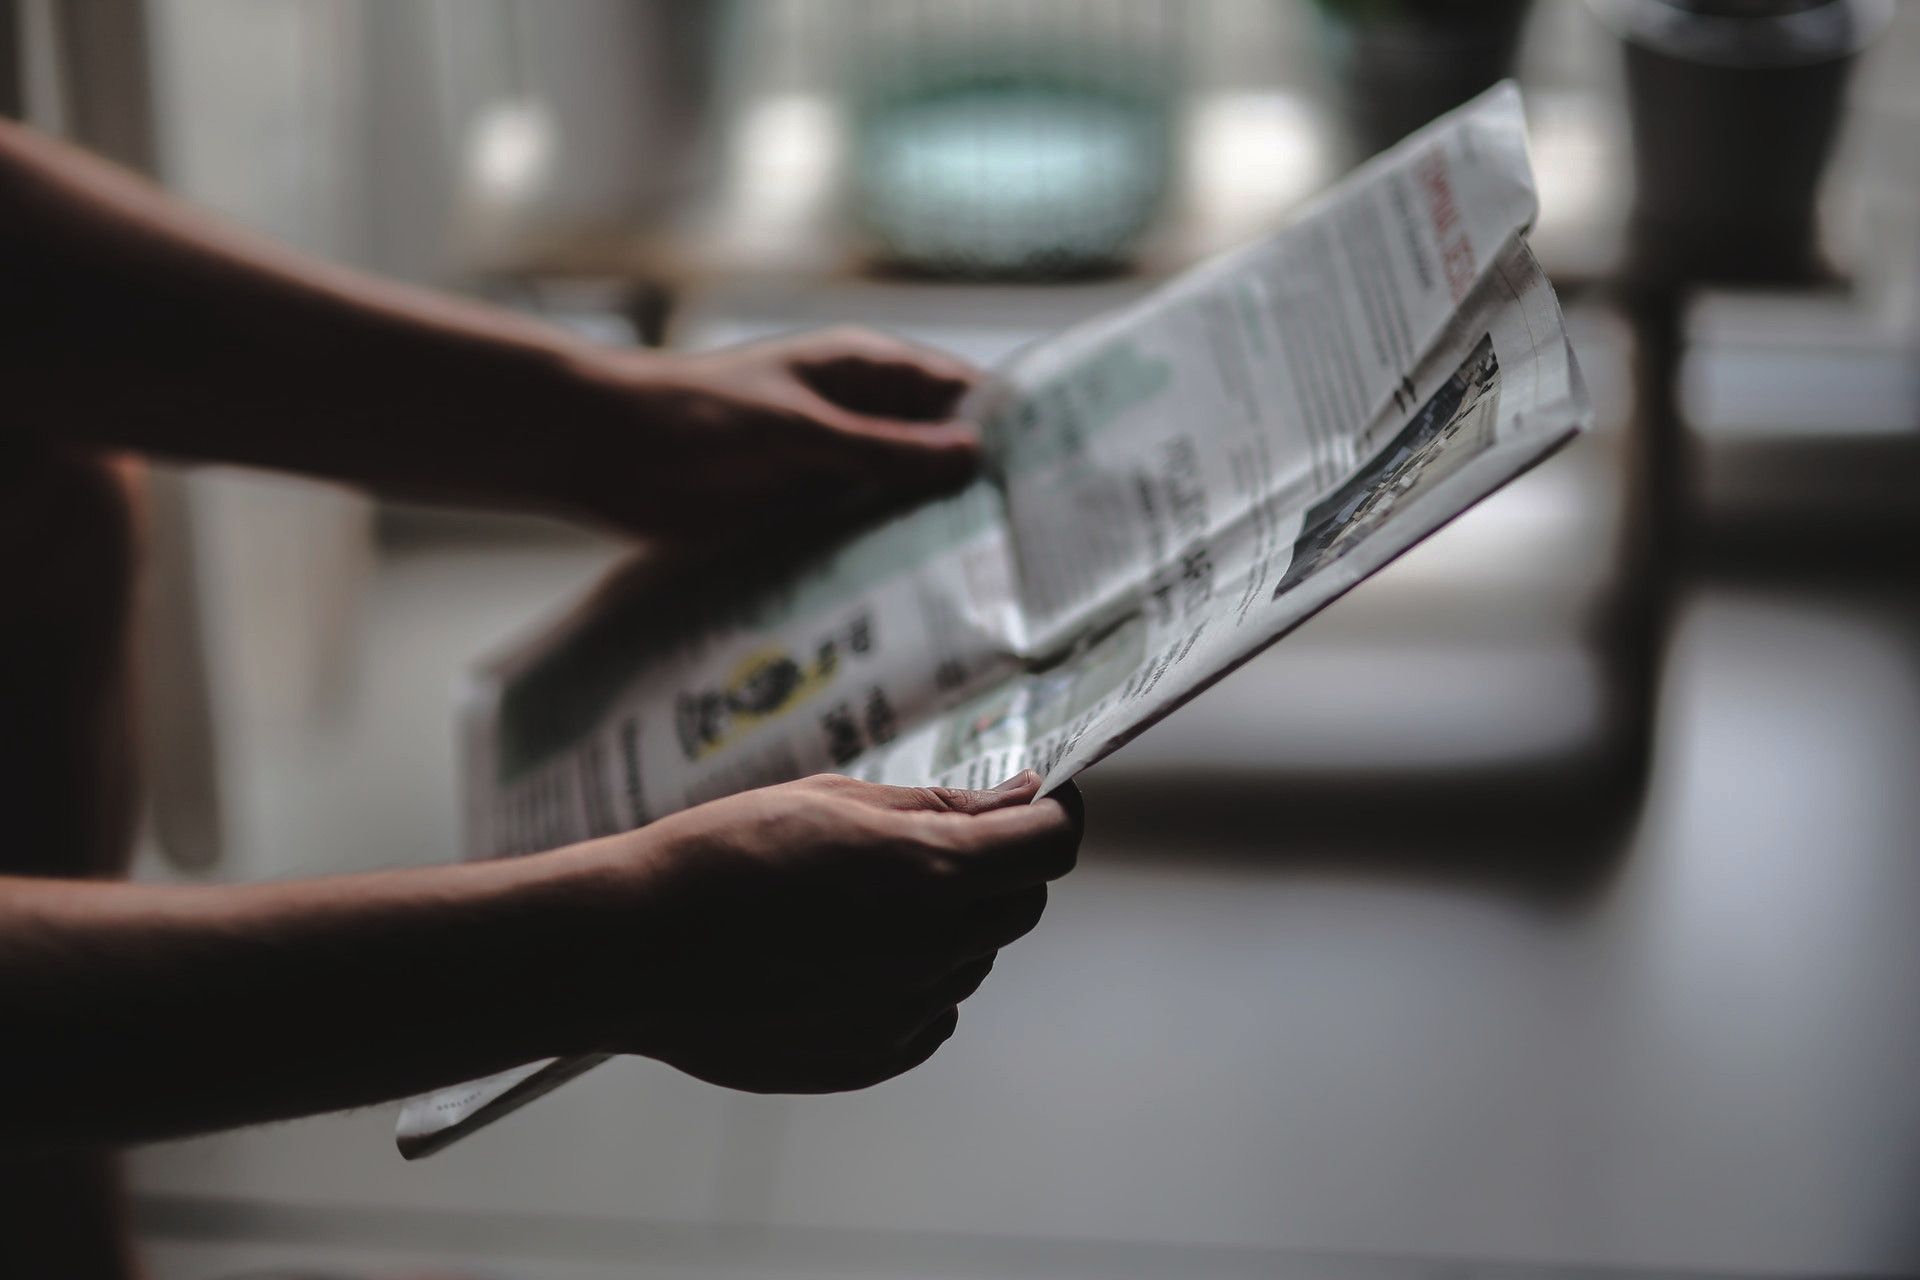 Photo of a man's forearms and hands holding a newspaper, in the foreground. The background is blurred.